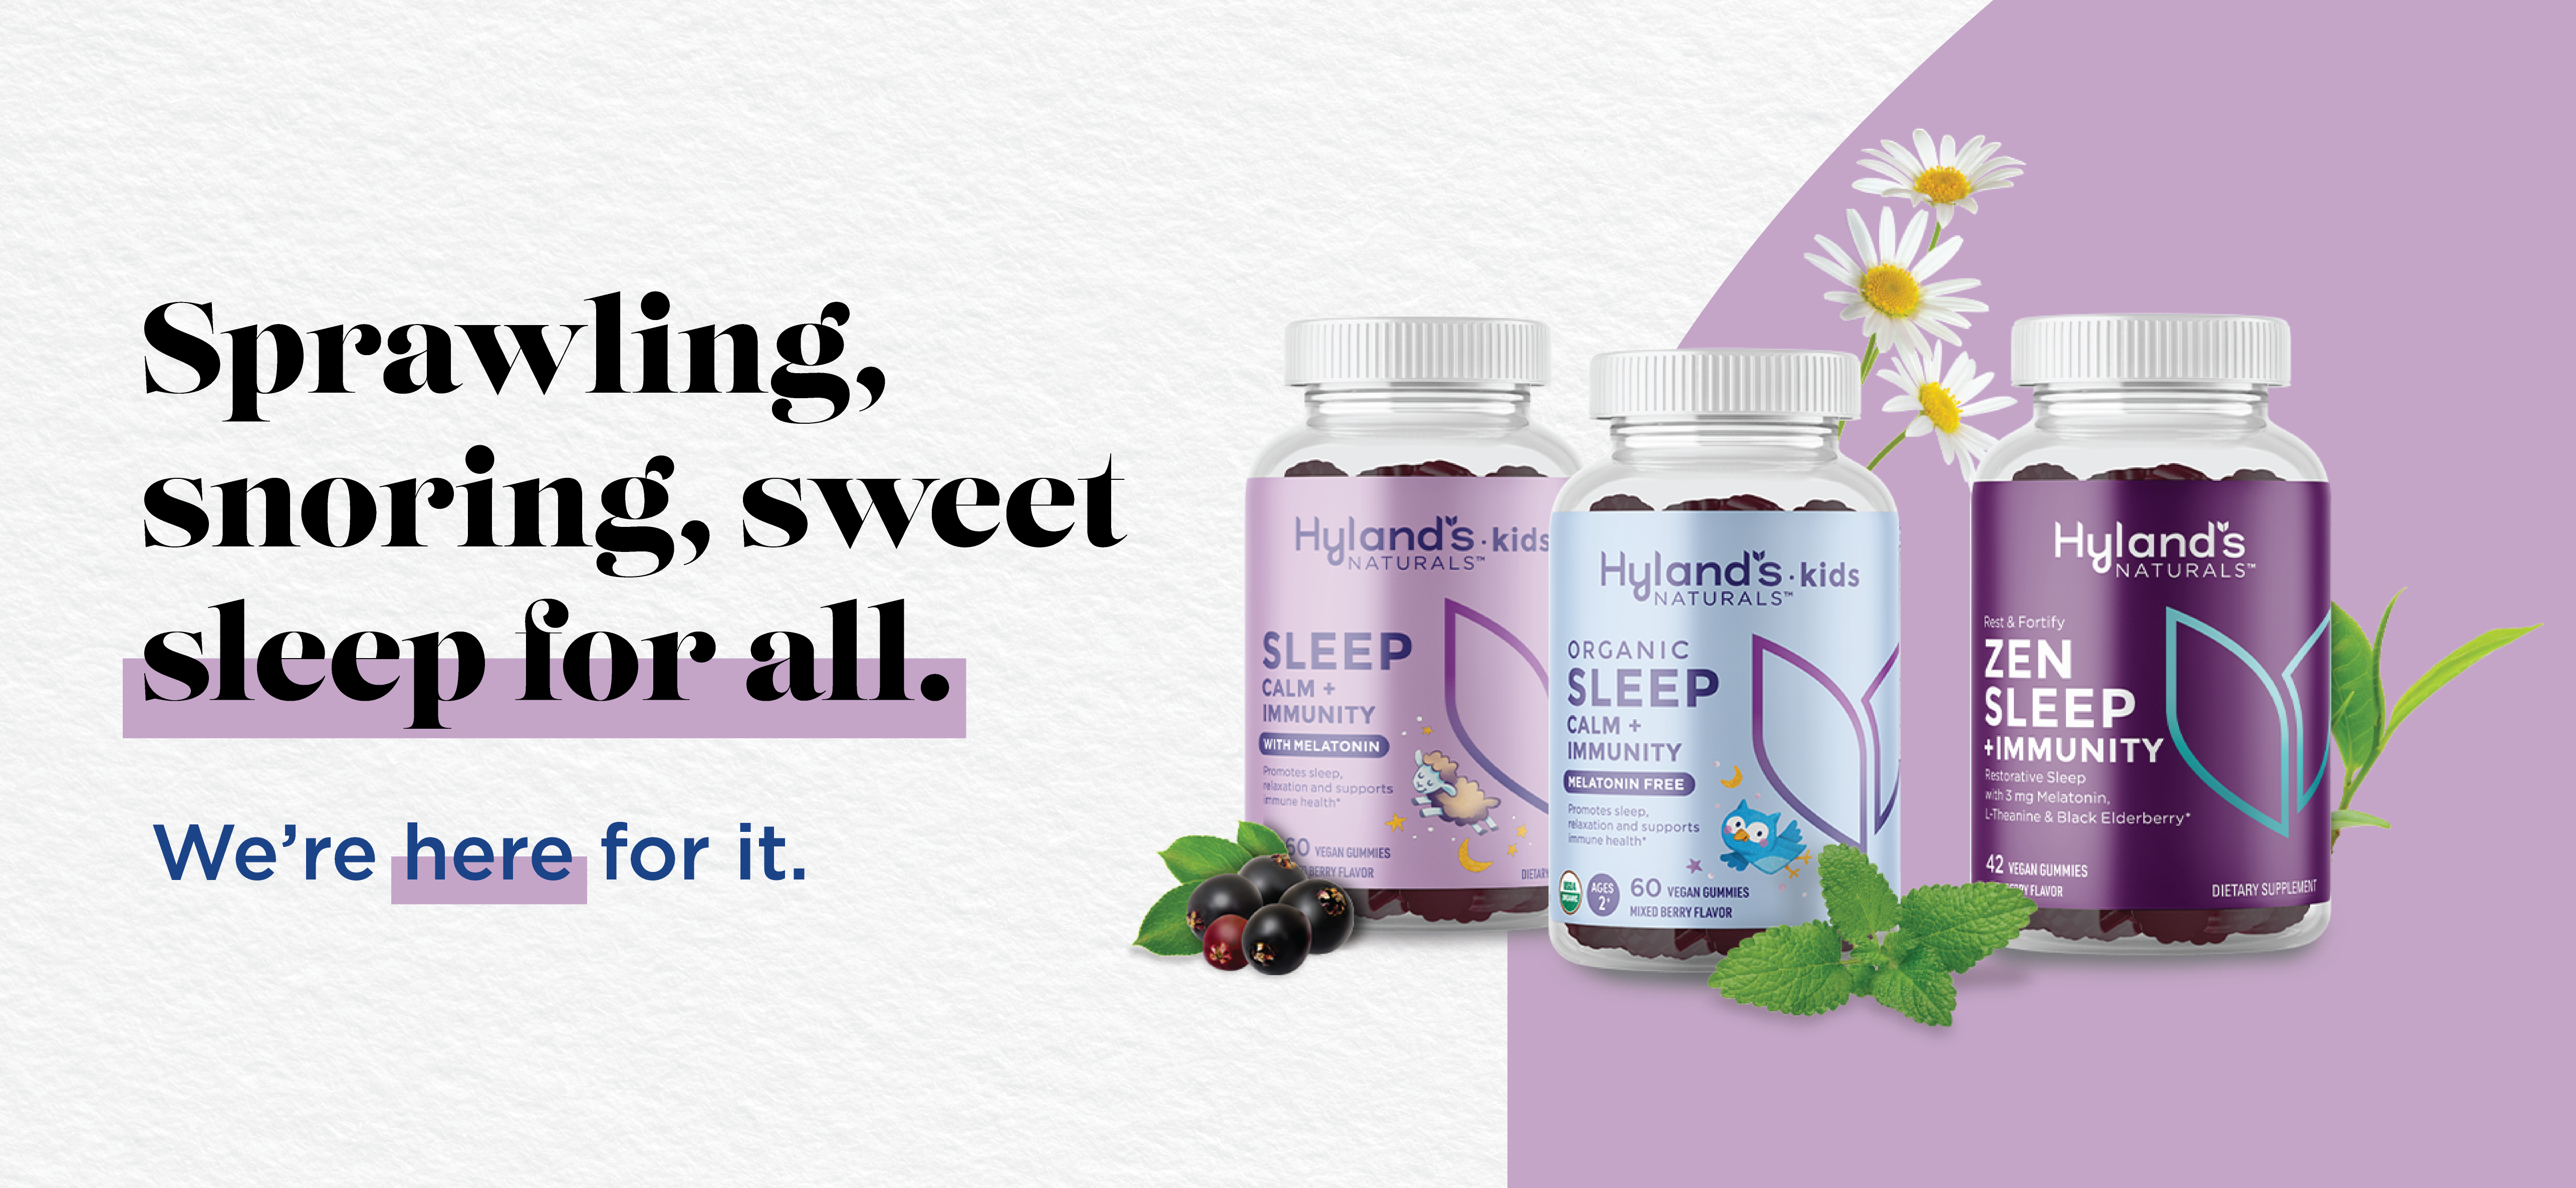 Sprawling, snoring, sweet sleep for all. We're here for it. Try one of our three sleep supplements. 